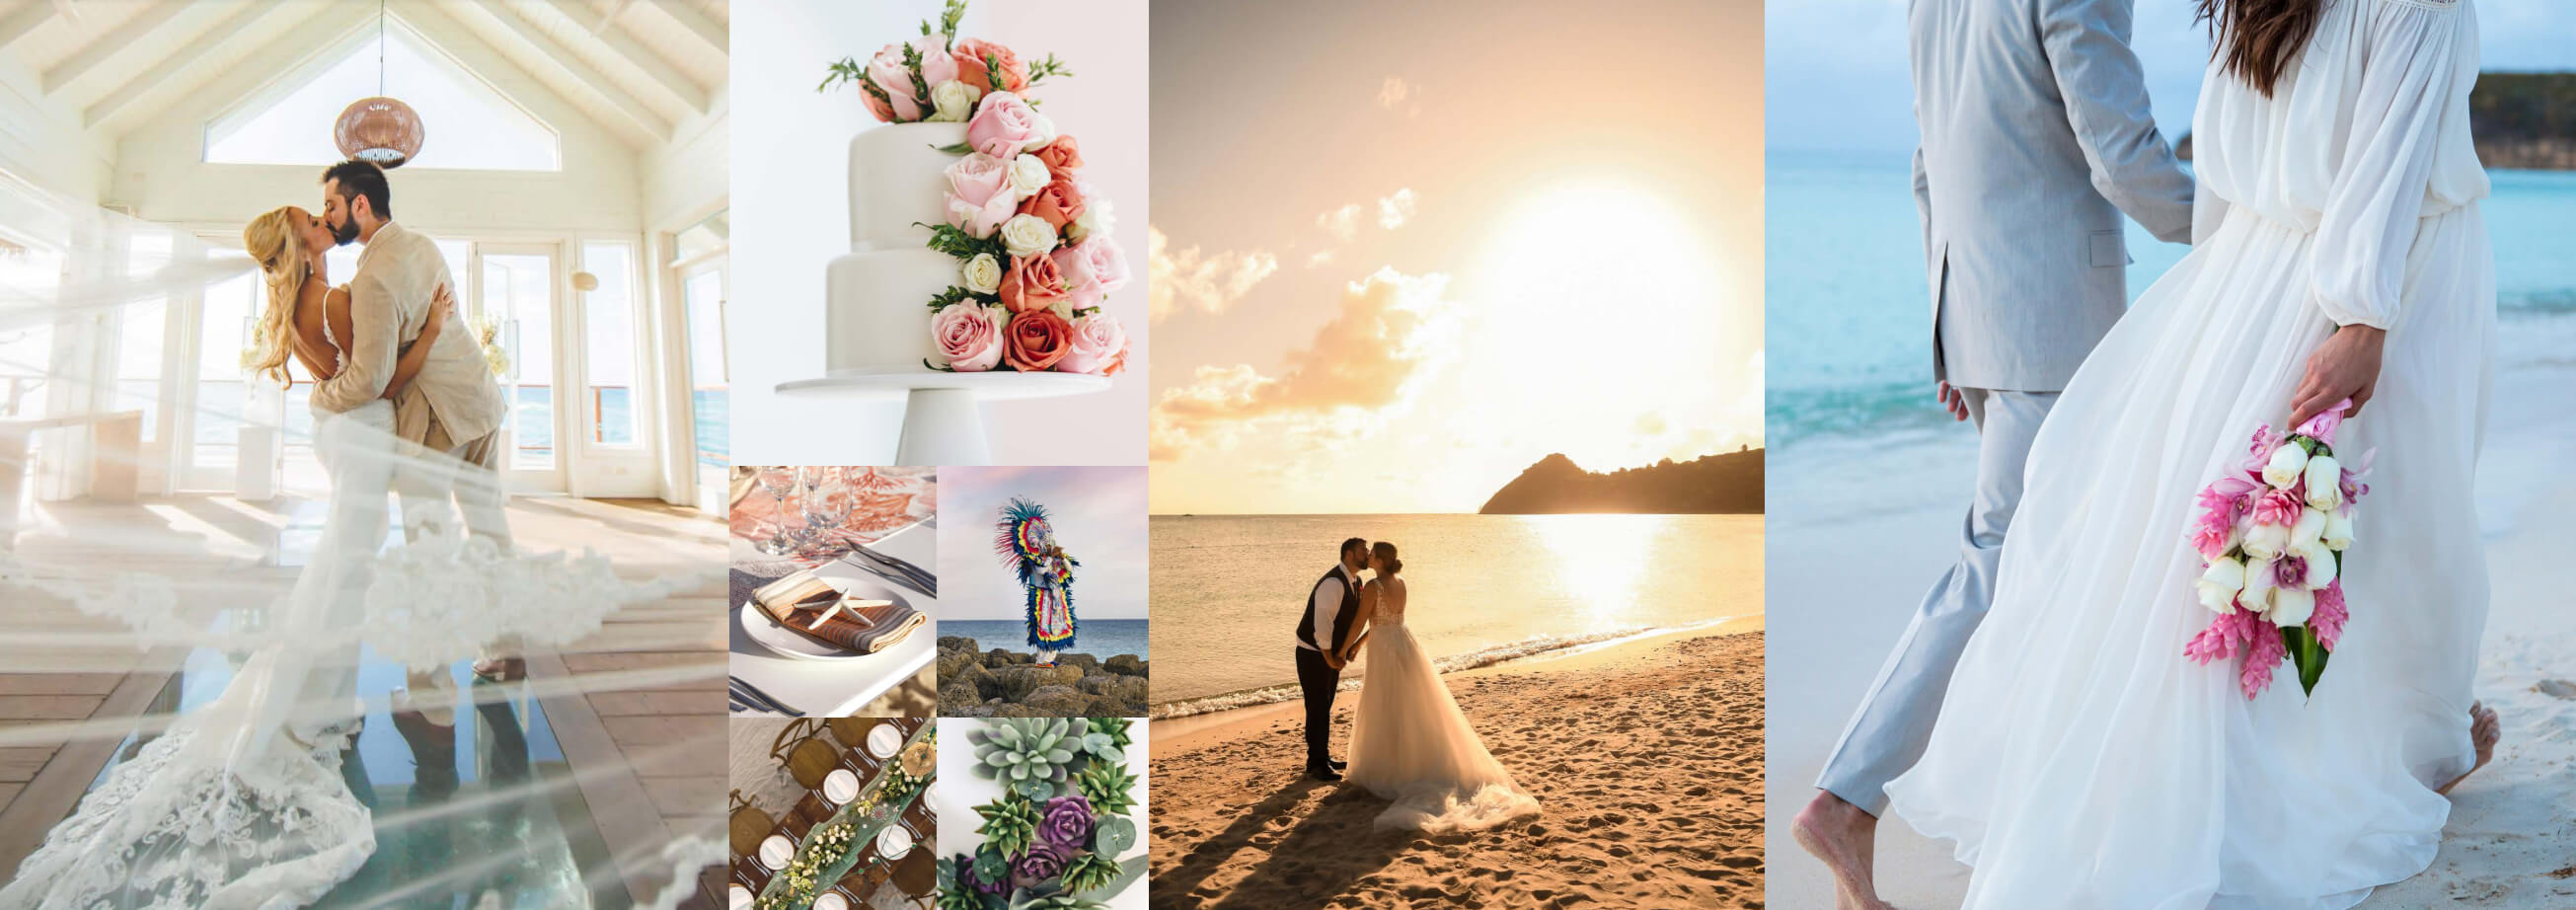 Sandals Resorts Wedding Packages